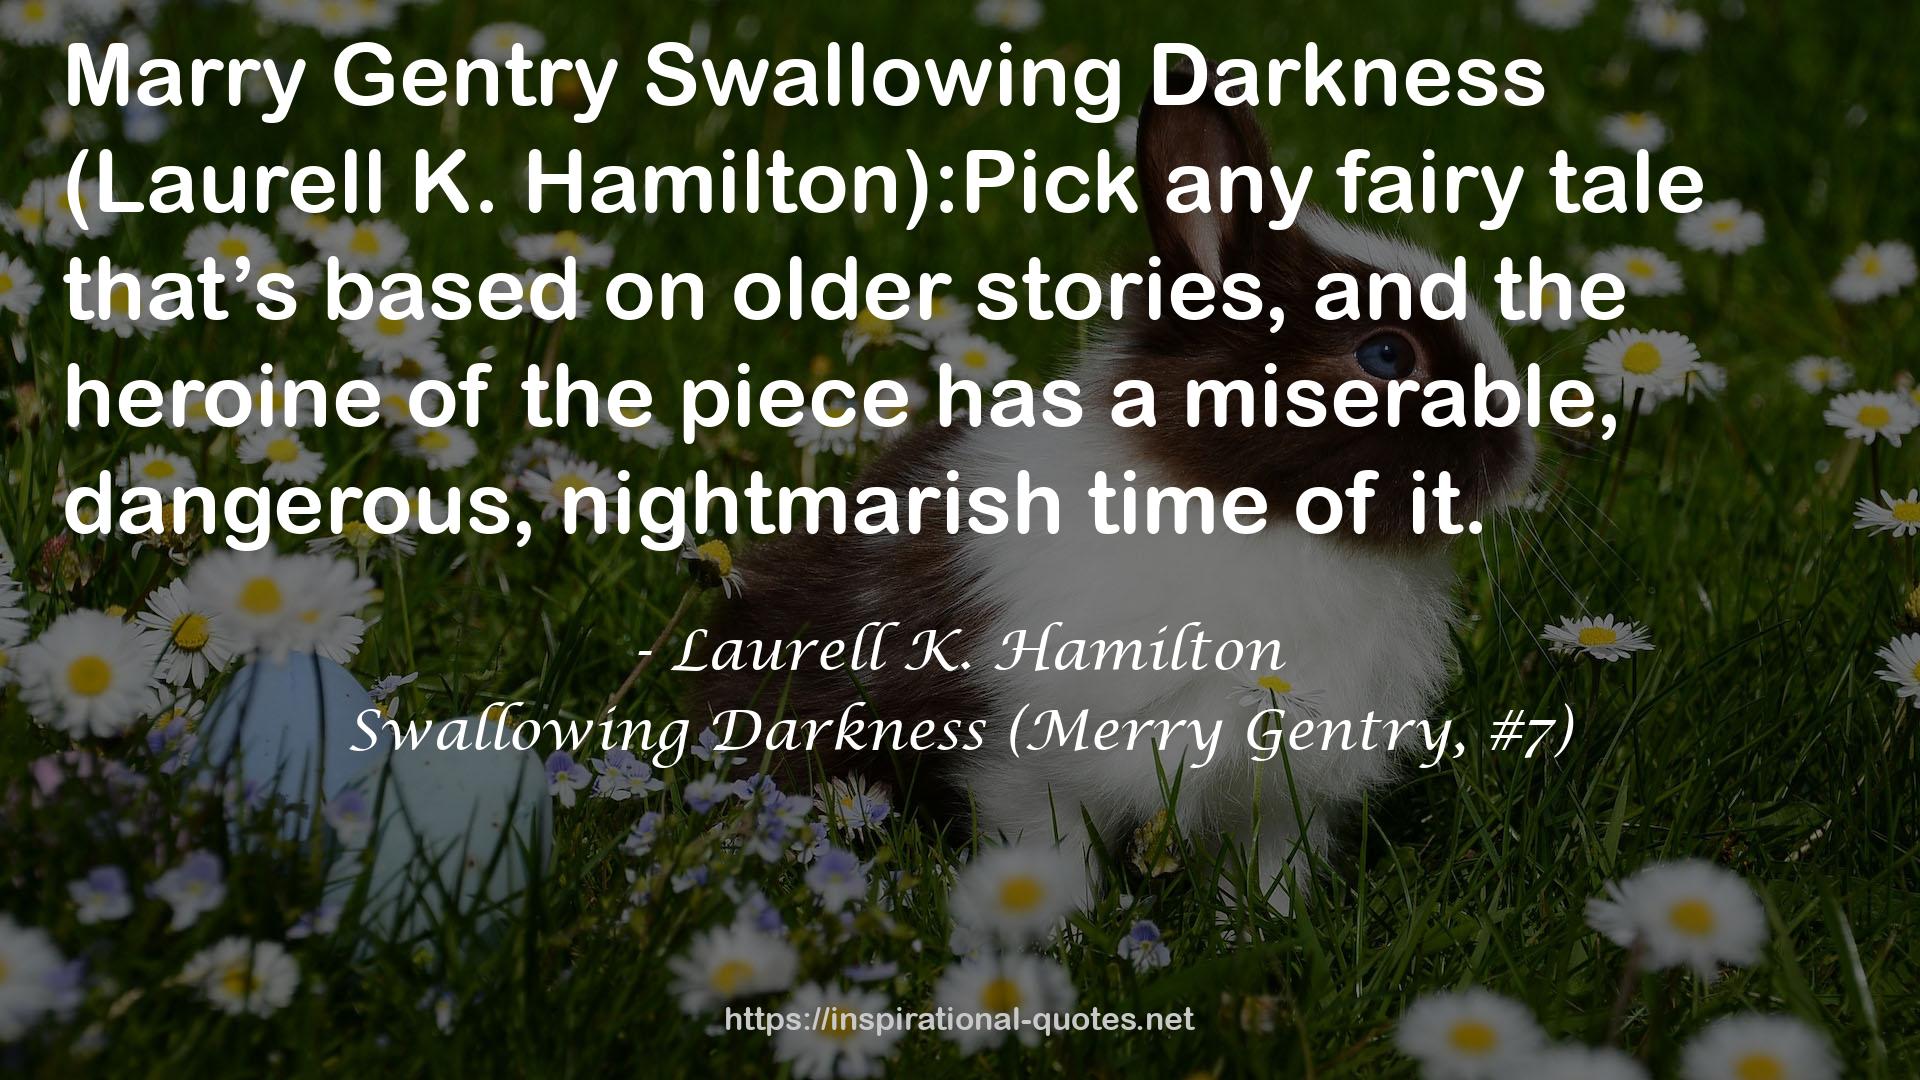 Swallowing Darkness (Merry Gentry, #7) QUOTES